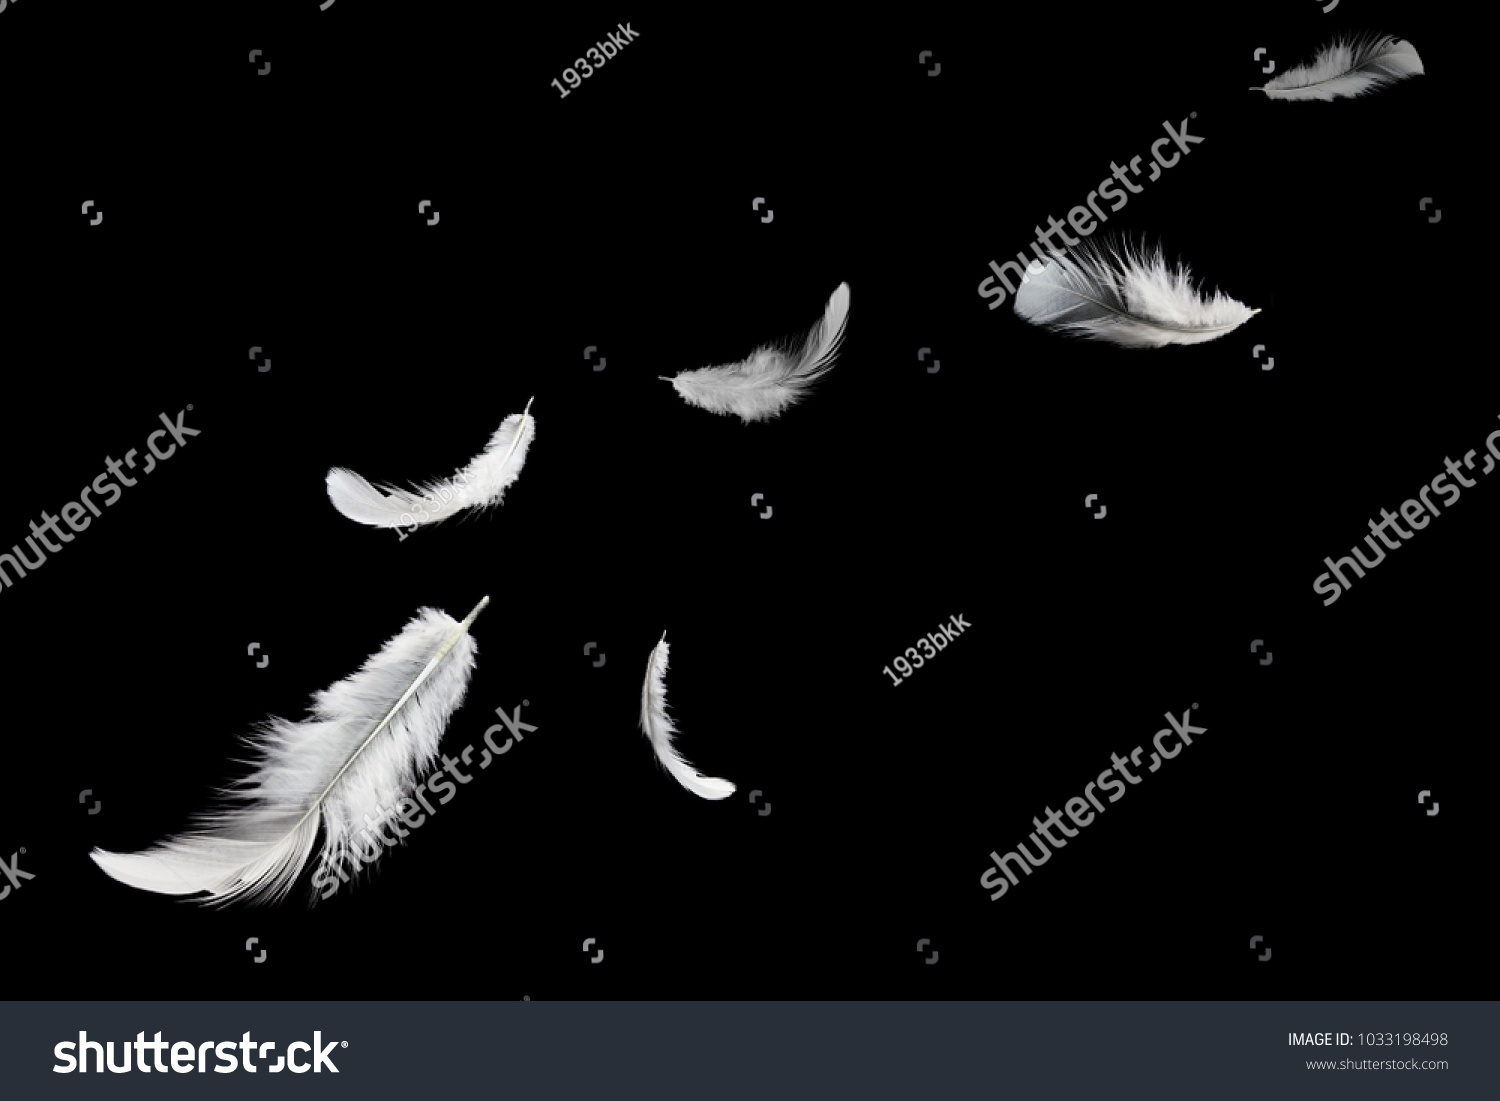 Abstract, soft white feather floating in the air, isolated on black background #1033198498